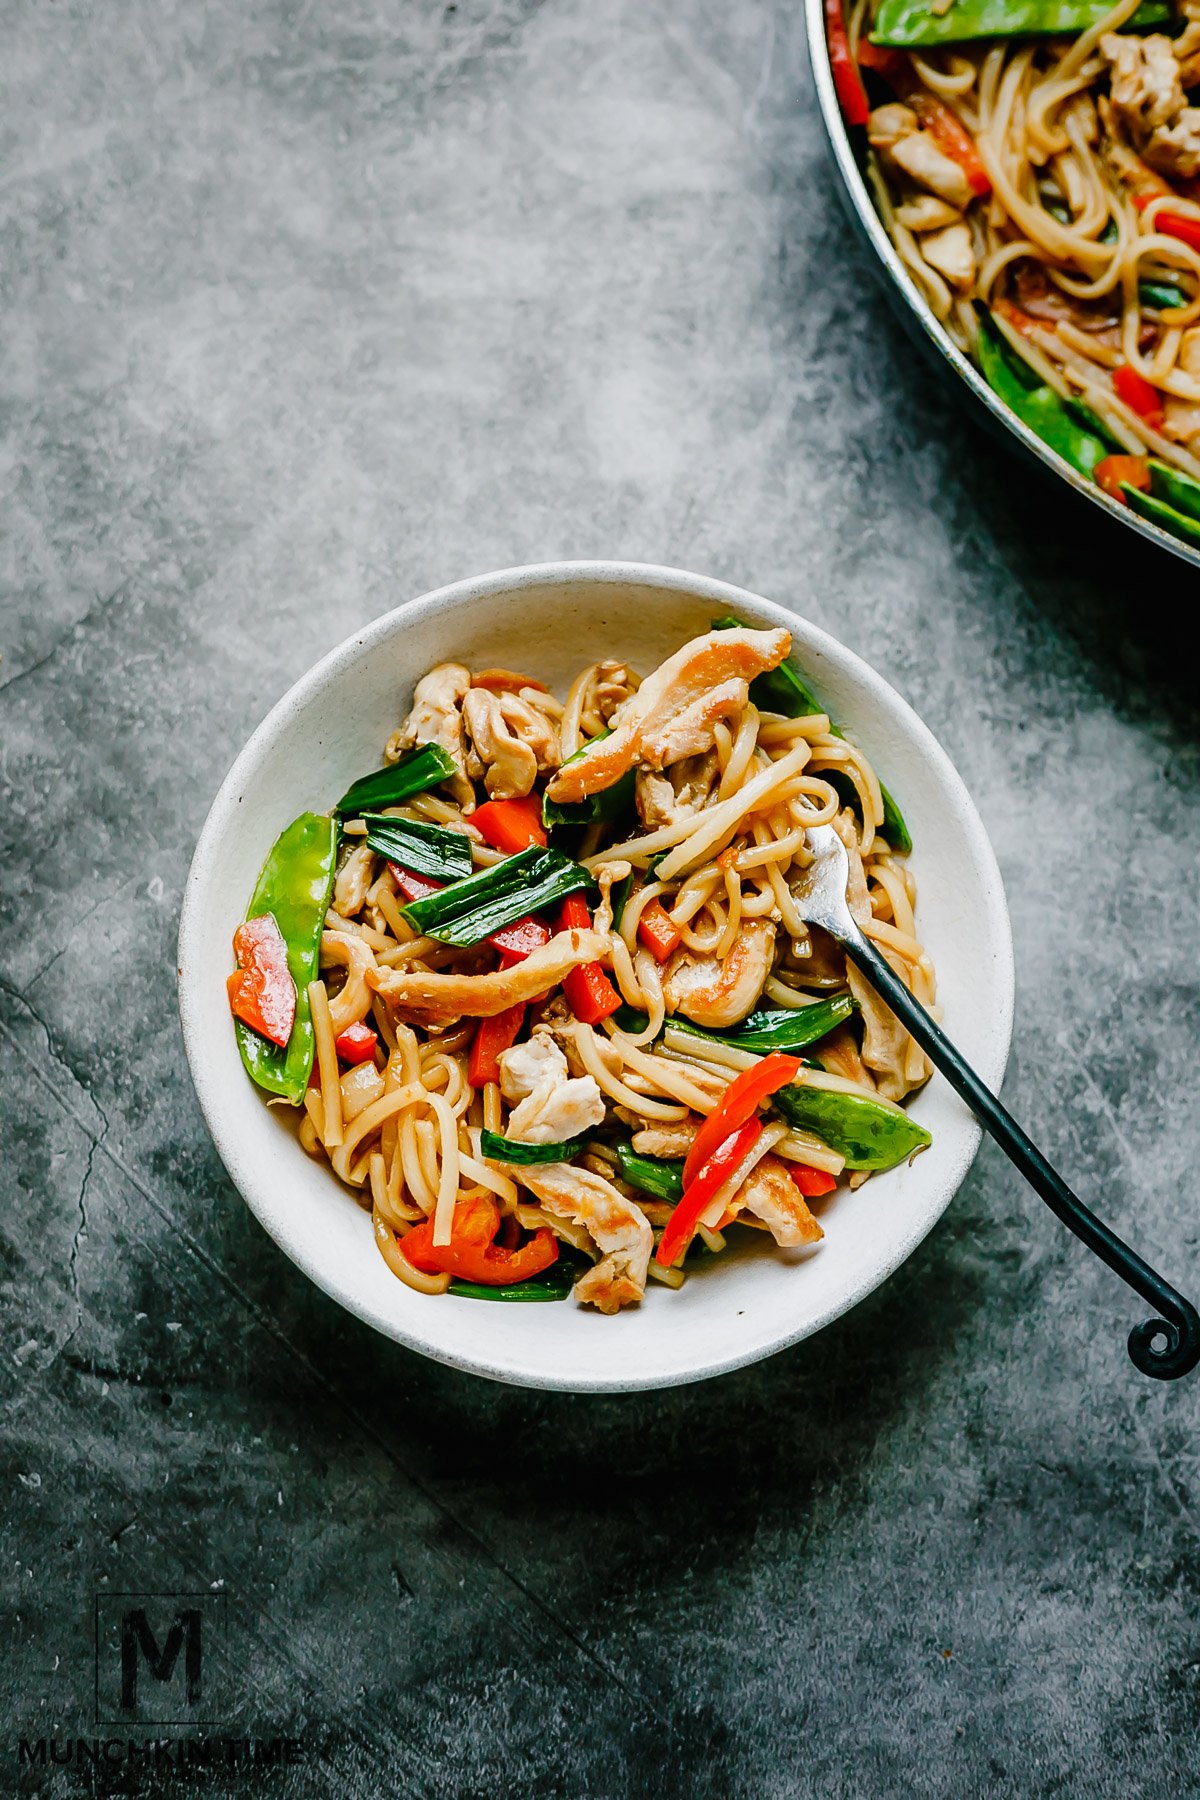 This Chicken Stir Fry Recipe is an Easy Dinner Meal - taking fresh ingredients like organic snow peas, red crunchy bell pepper, green onions and combining them with simple to make chicken stir fry sauce and cooked rice noodle pasta.